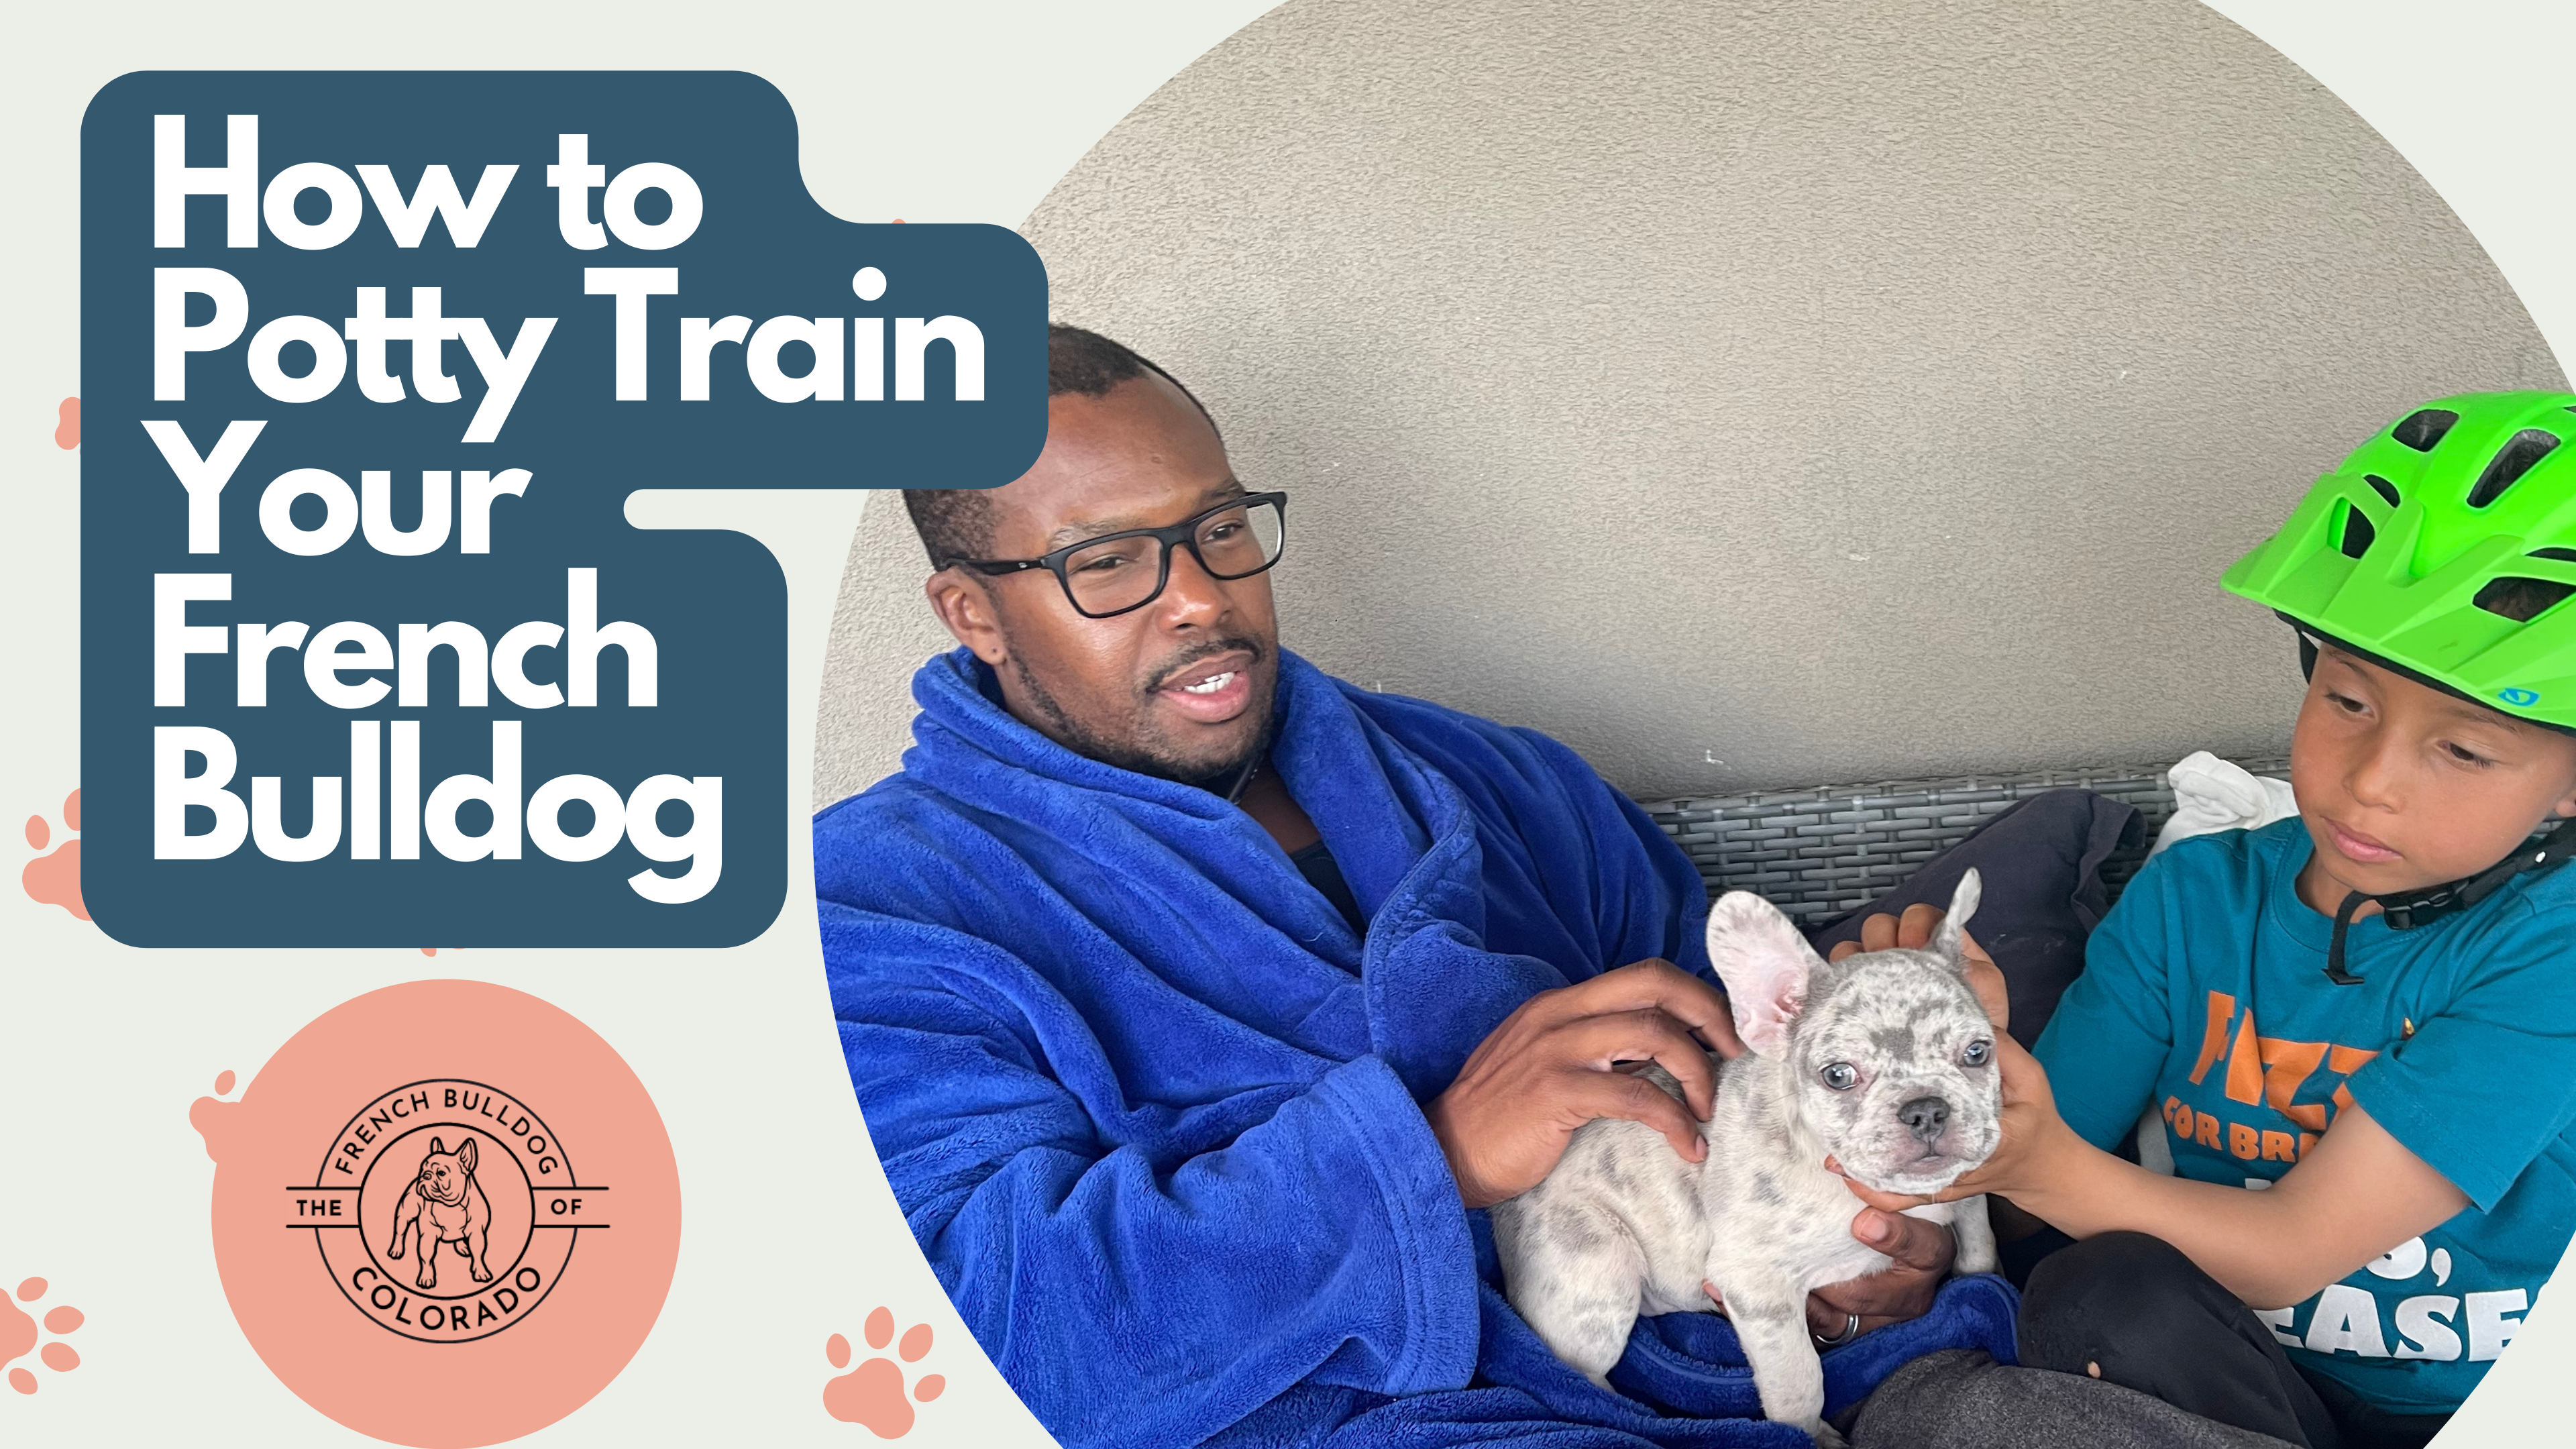 How to Potty Train Your French Bulldog